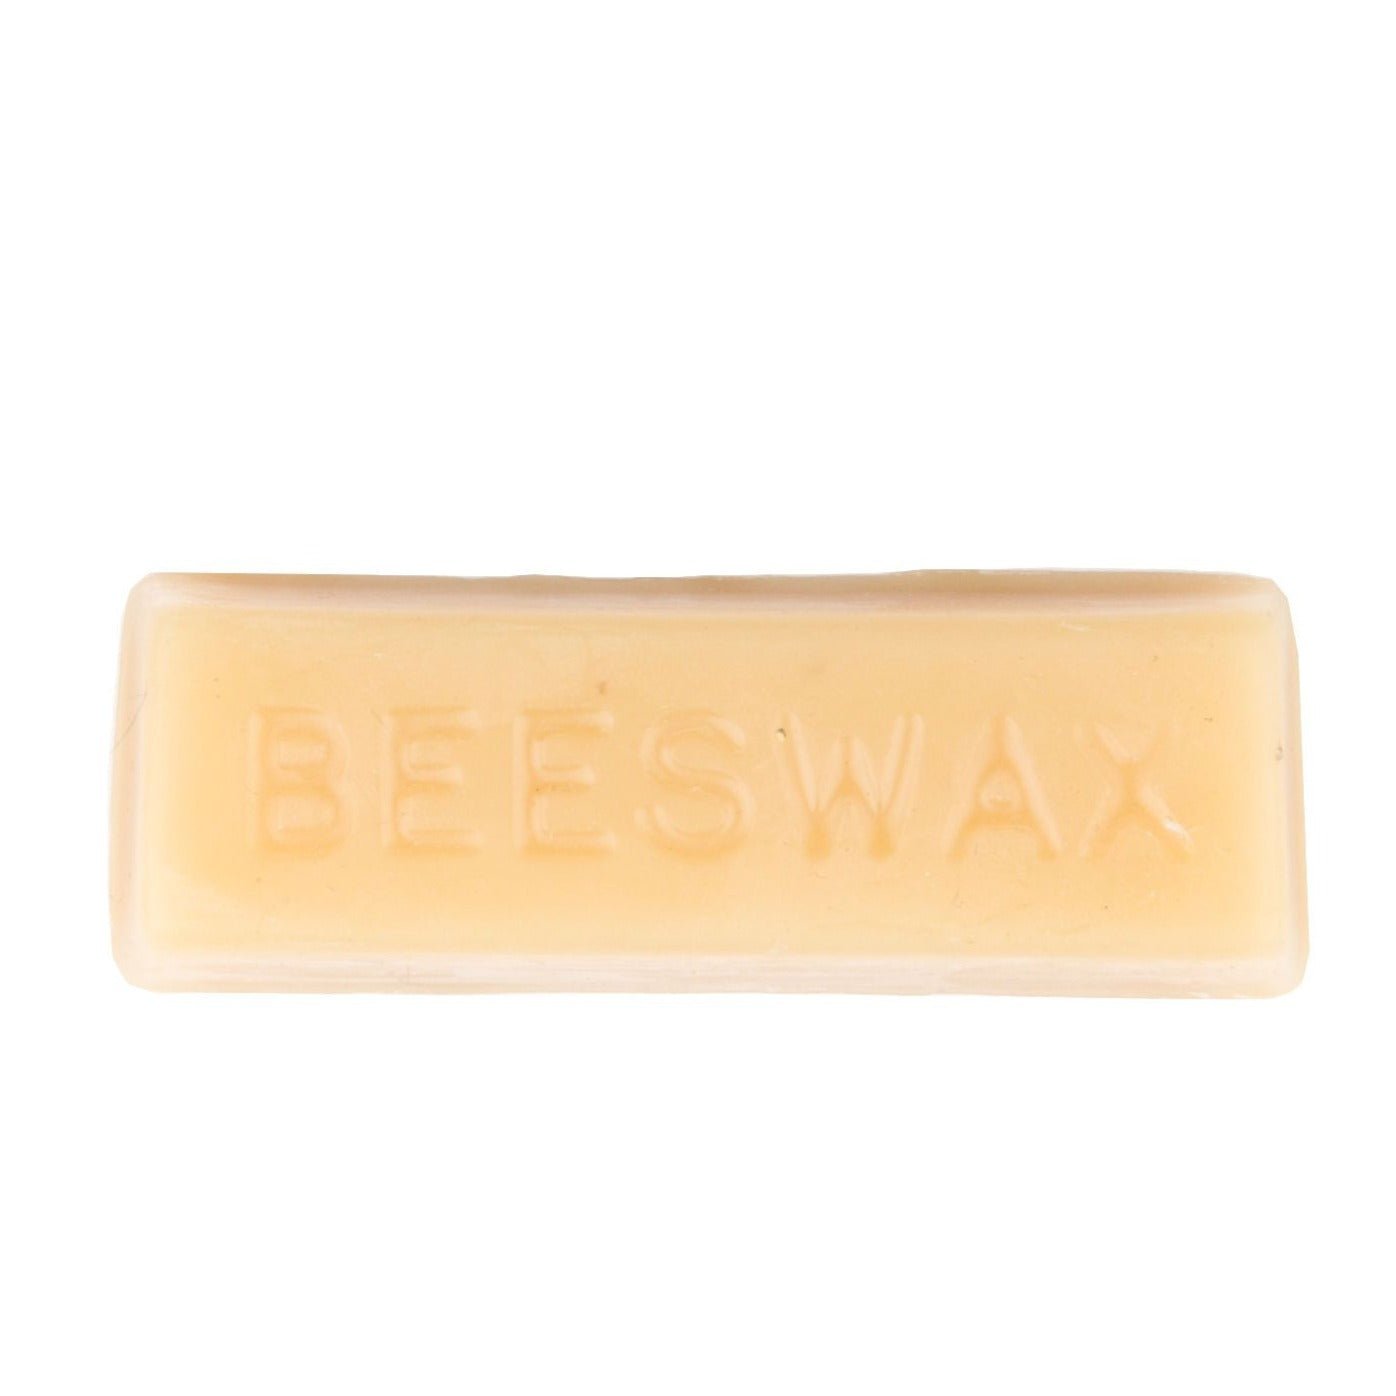 Fusion Distressing Beeswax Block - 25g - Rustic River Home